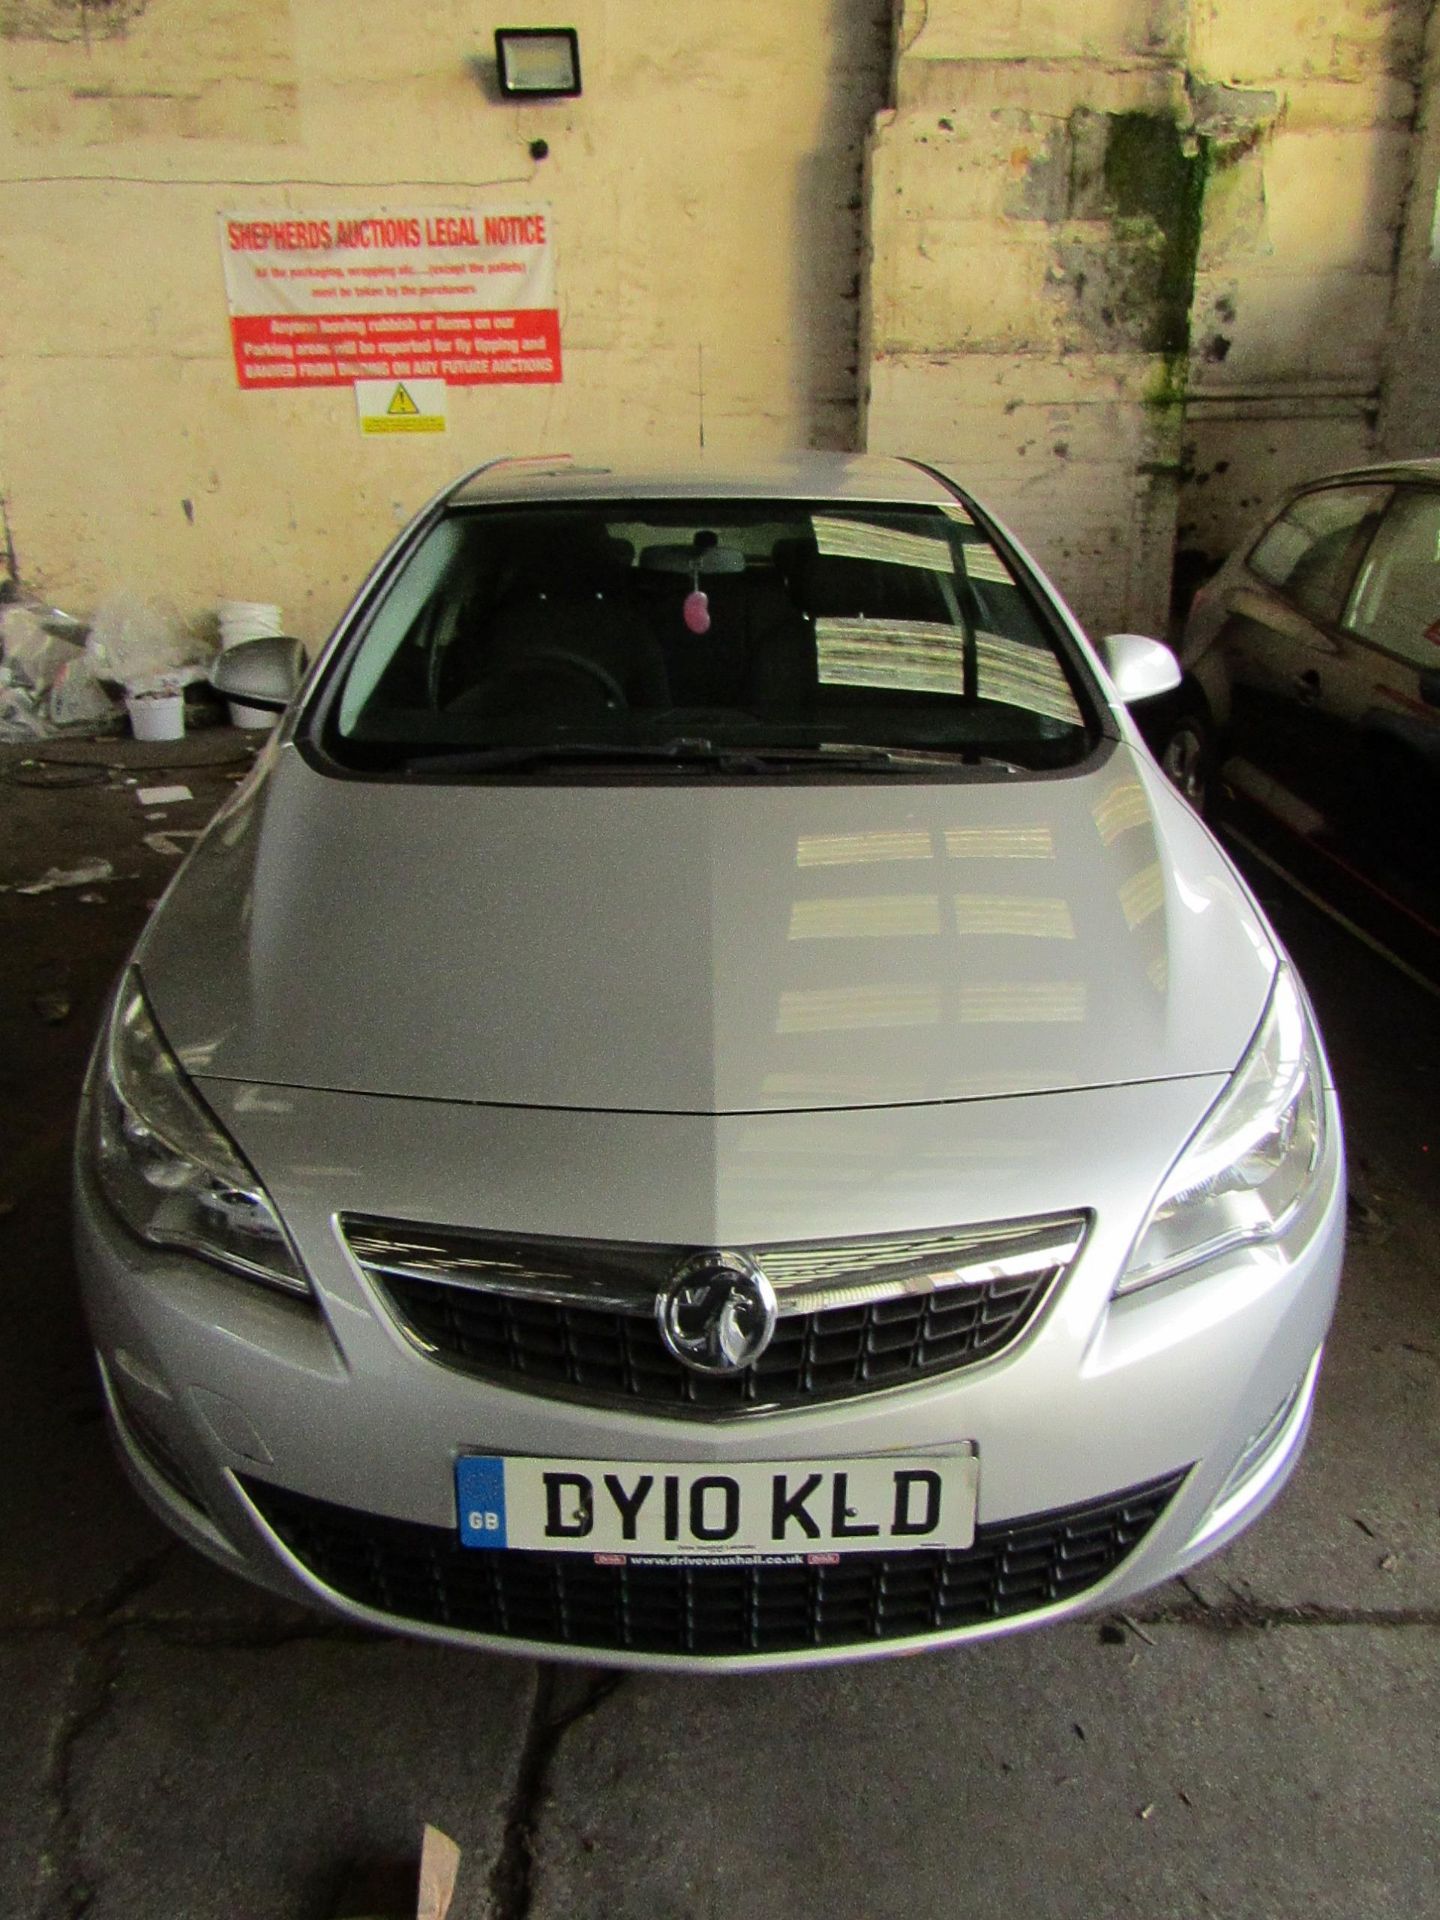 2010 Vauxhall Astra 1.6i Exclusive 113, 125,887 miles (unchecked), features climate control,